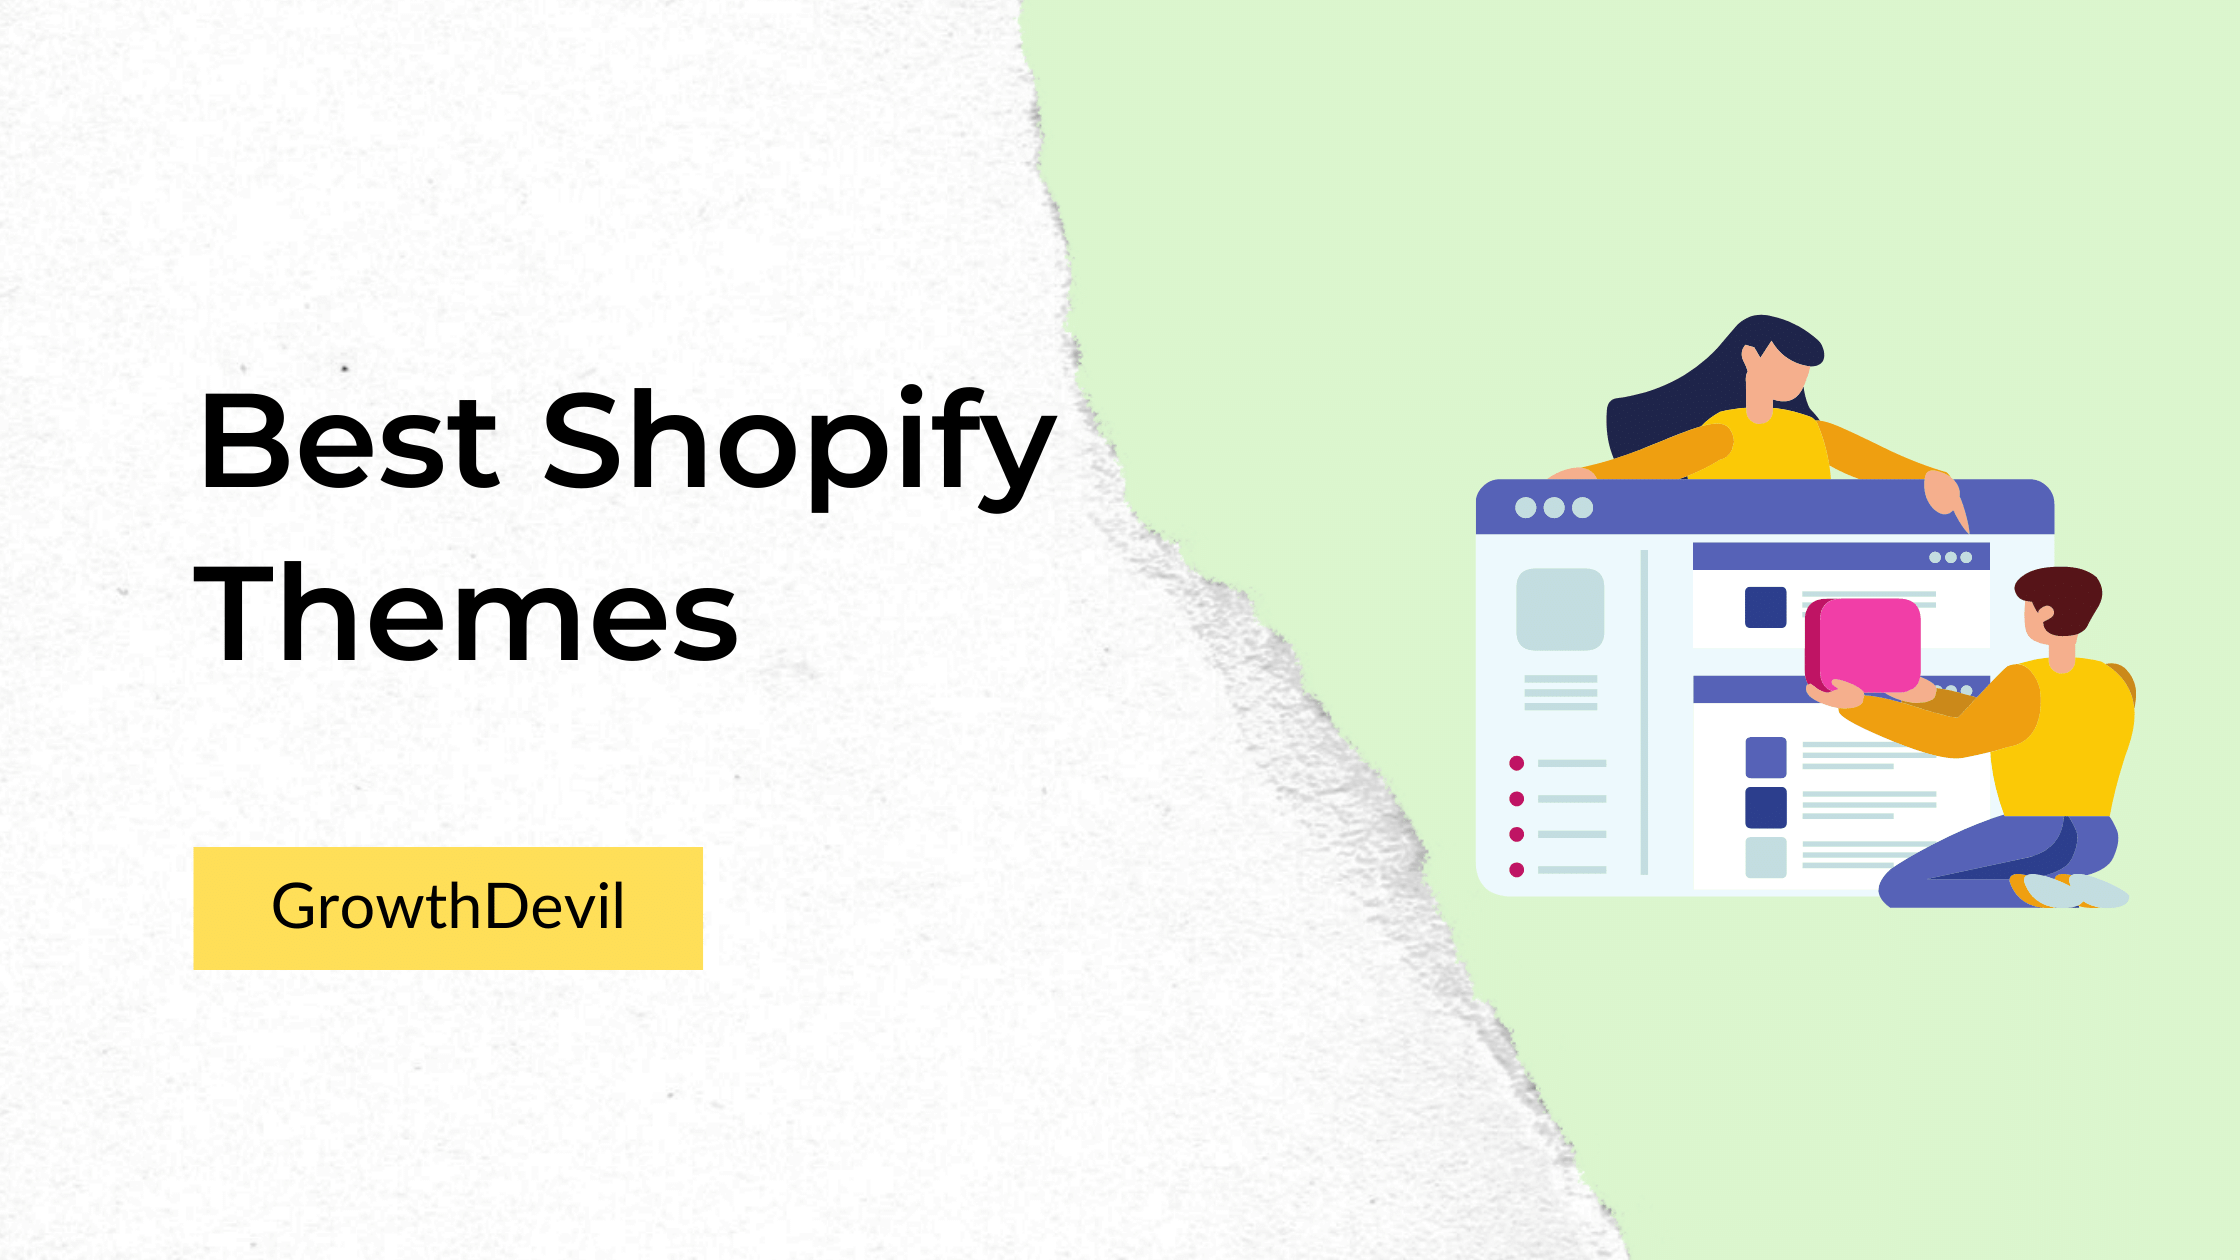 Best Shopify Themes - GrowthDevil